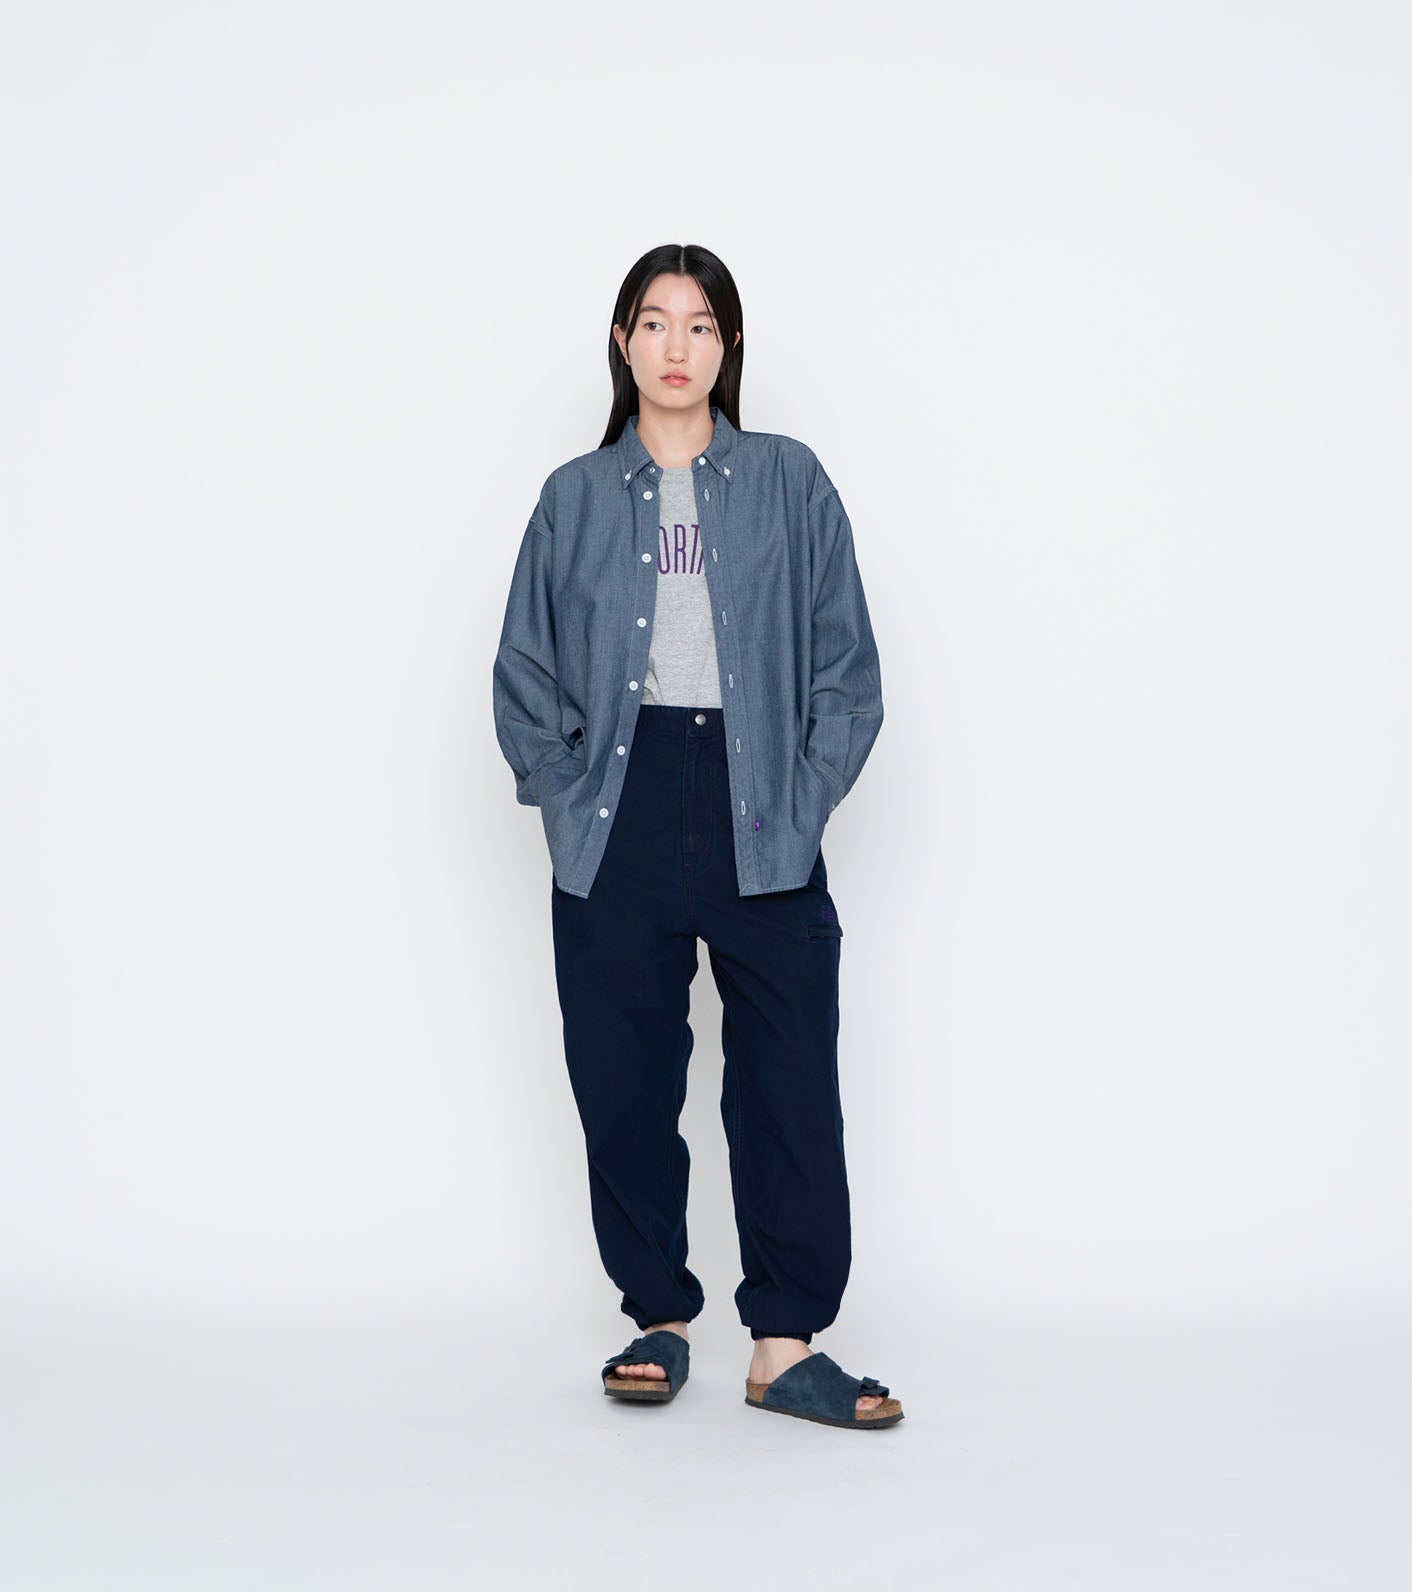 THE NORTH FACE PURPLE LABEL Stroll Field Pants